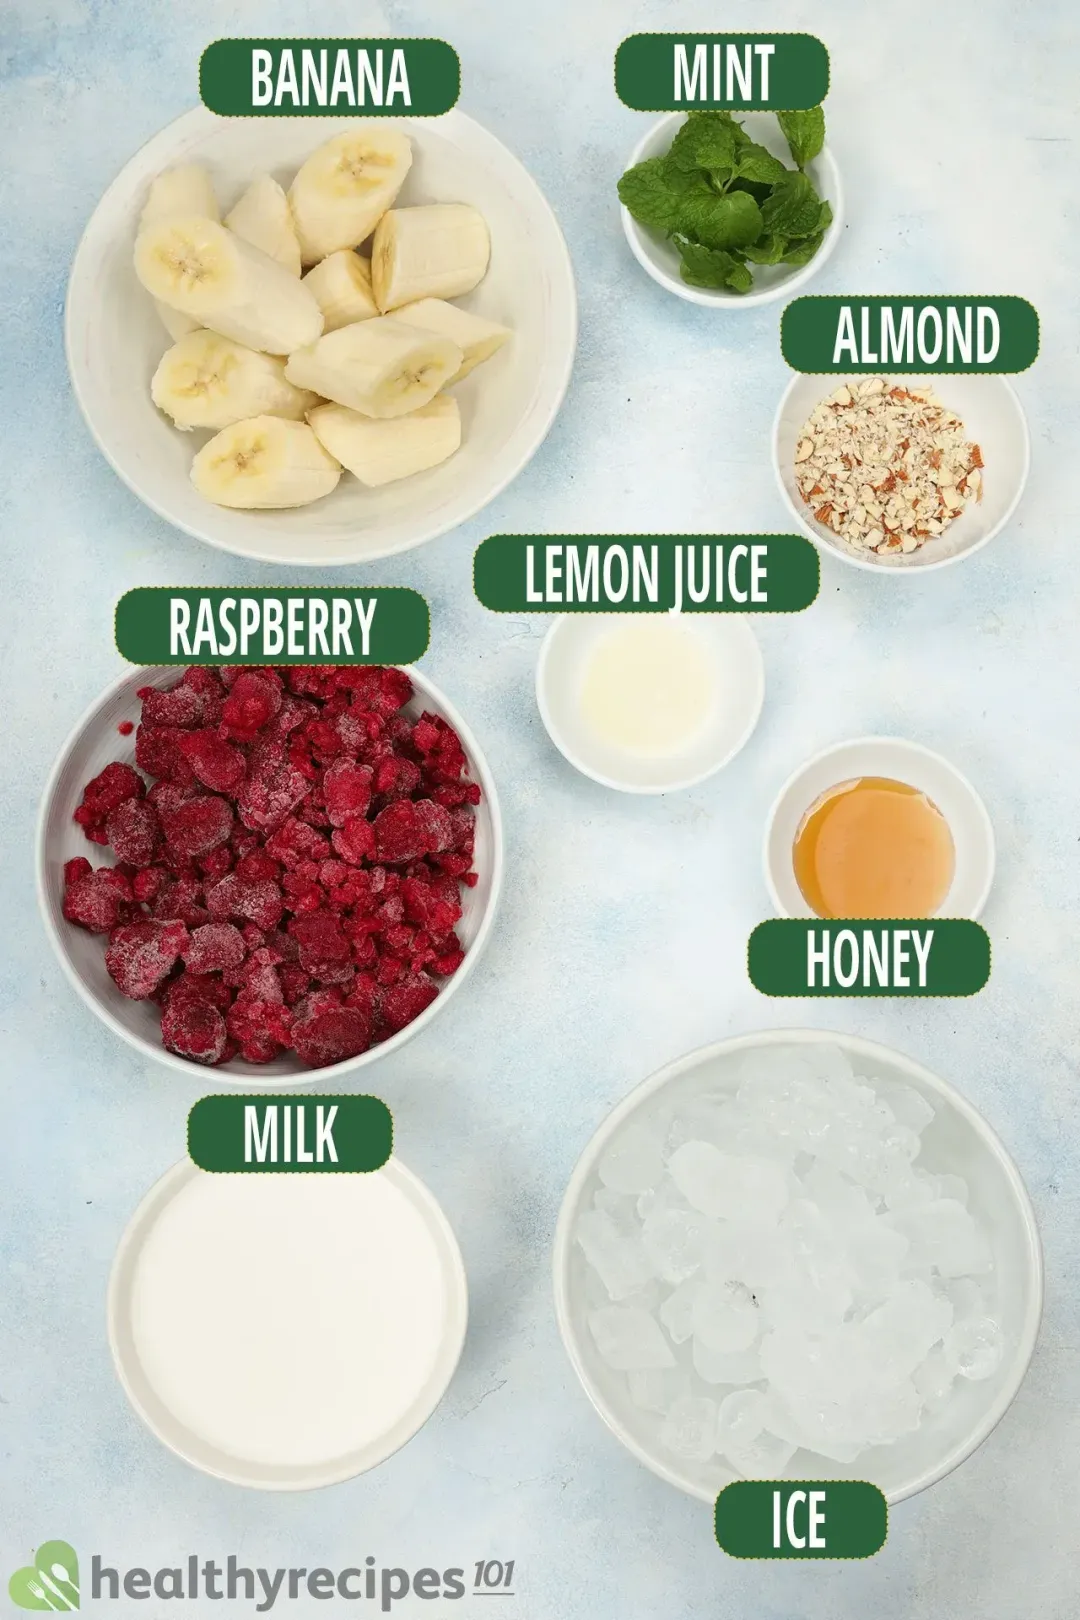 Ingredients for Raspberry Banana Smoothie